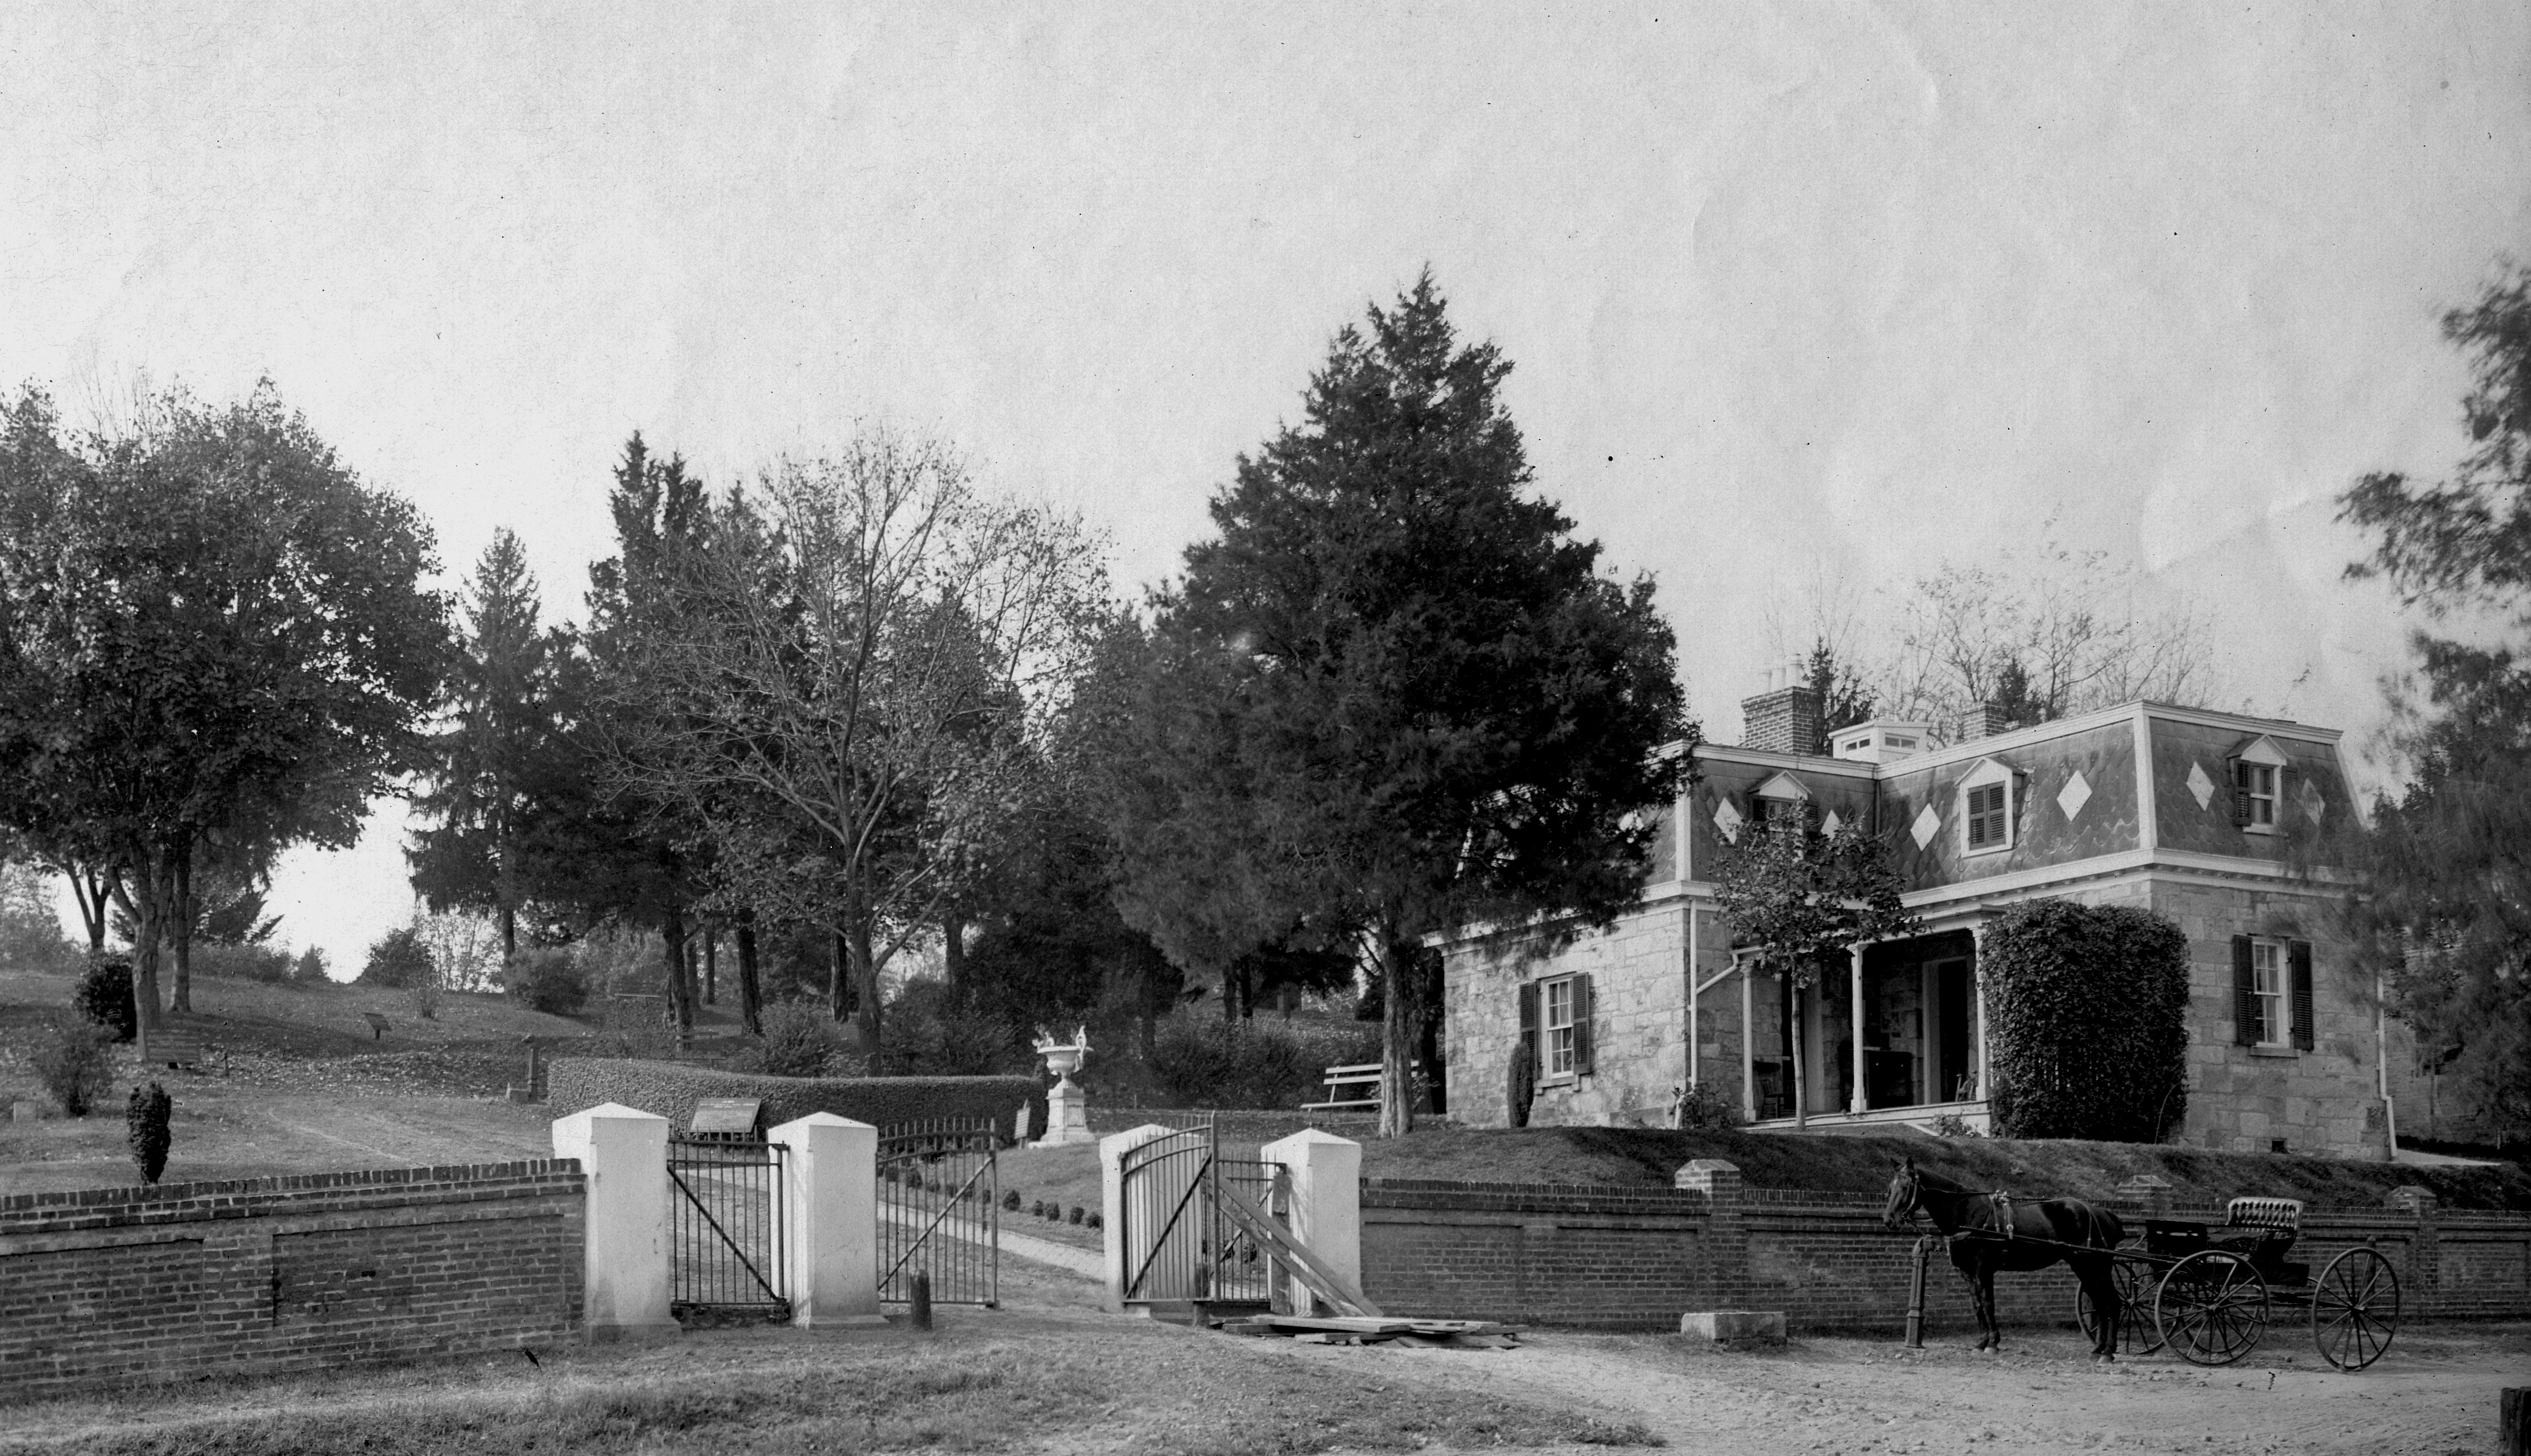 Black and white photo of cemetery lodge building at cemetery entrance.